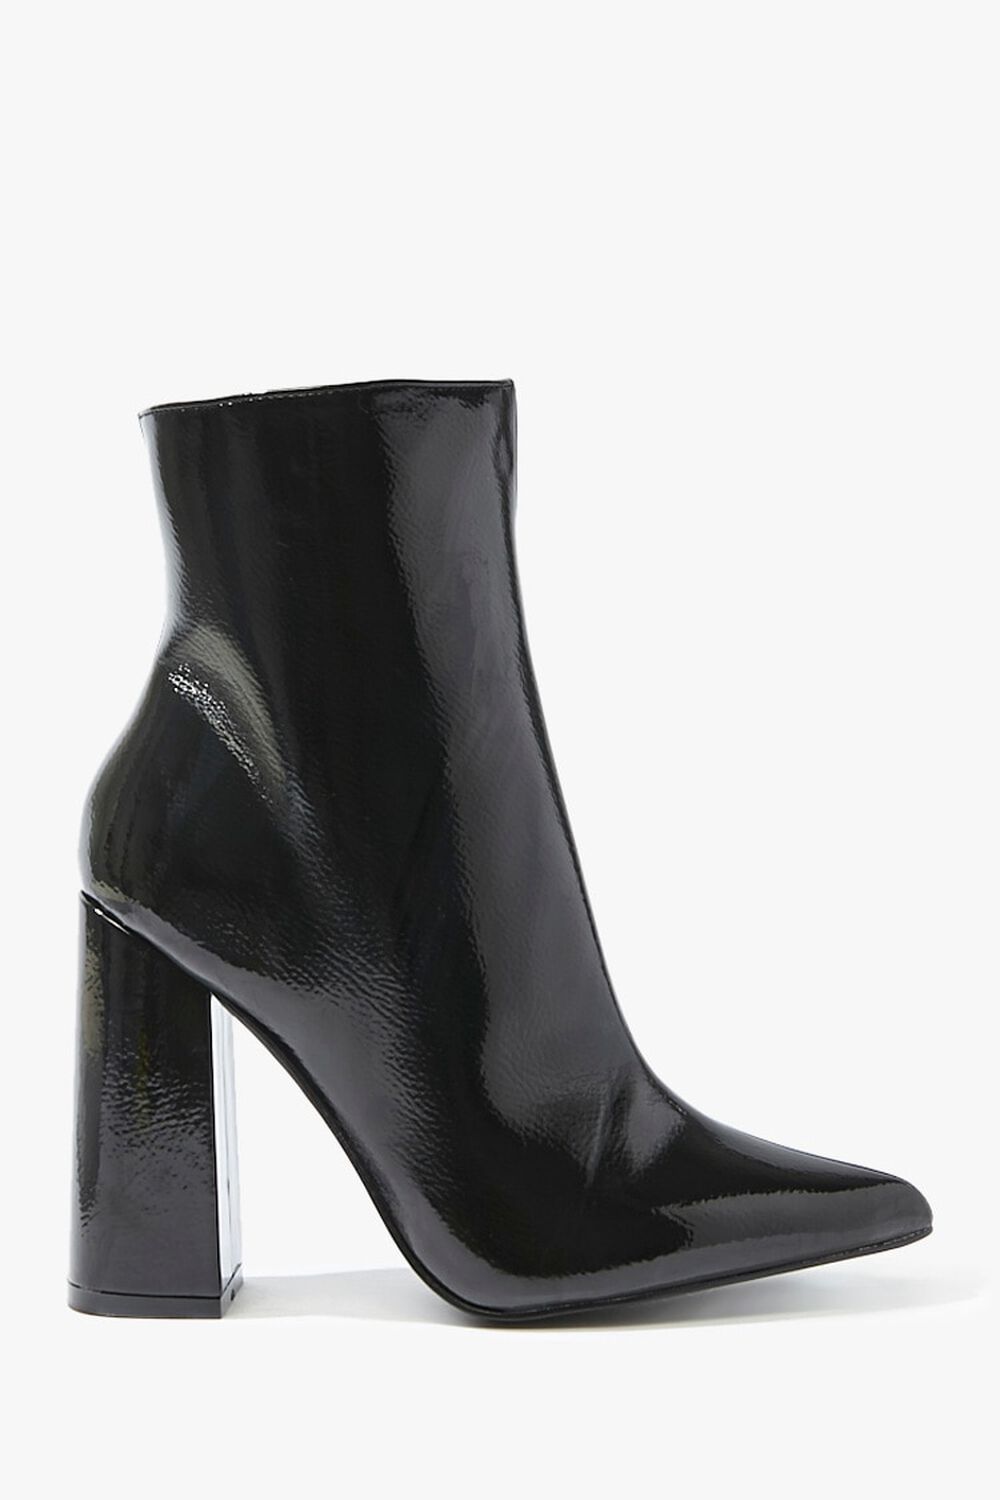 Faux Patent Leather Booties, image 1